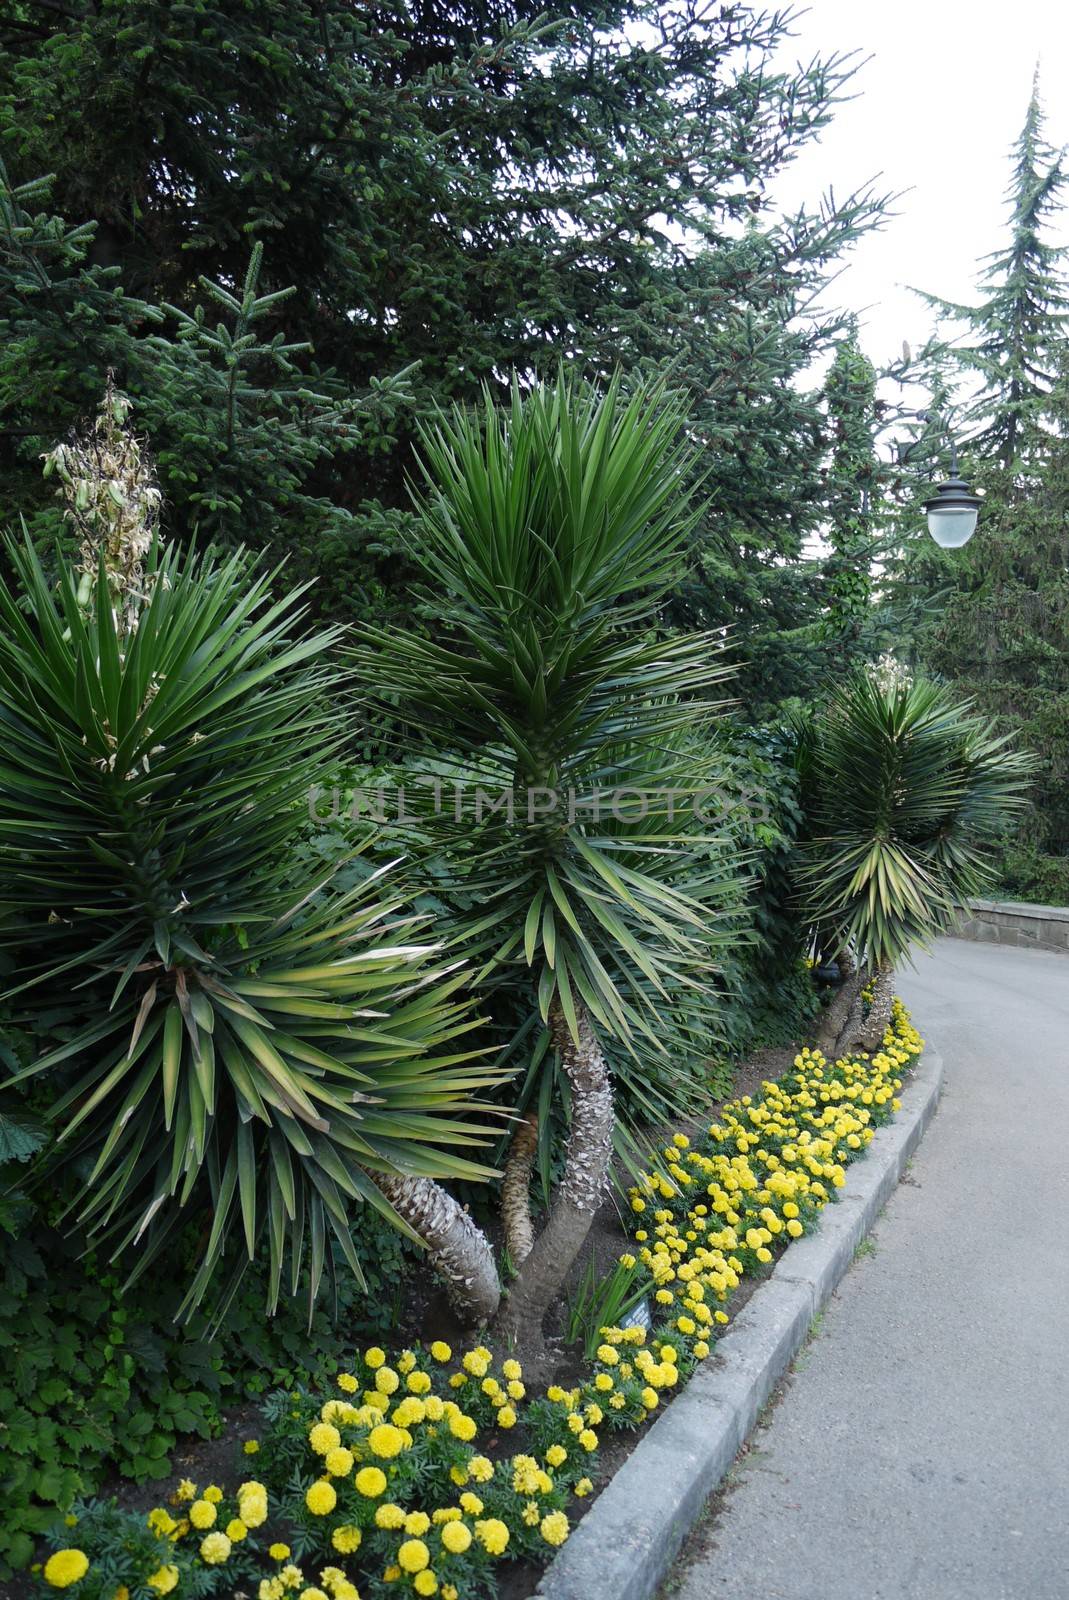 A flower bed with small yellow flowers and large green yuccas near a walking park lane by Adamchuk